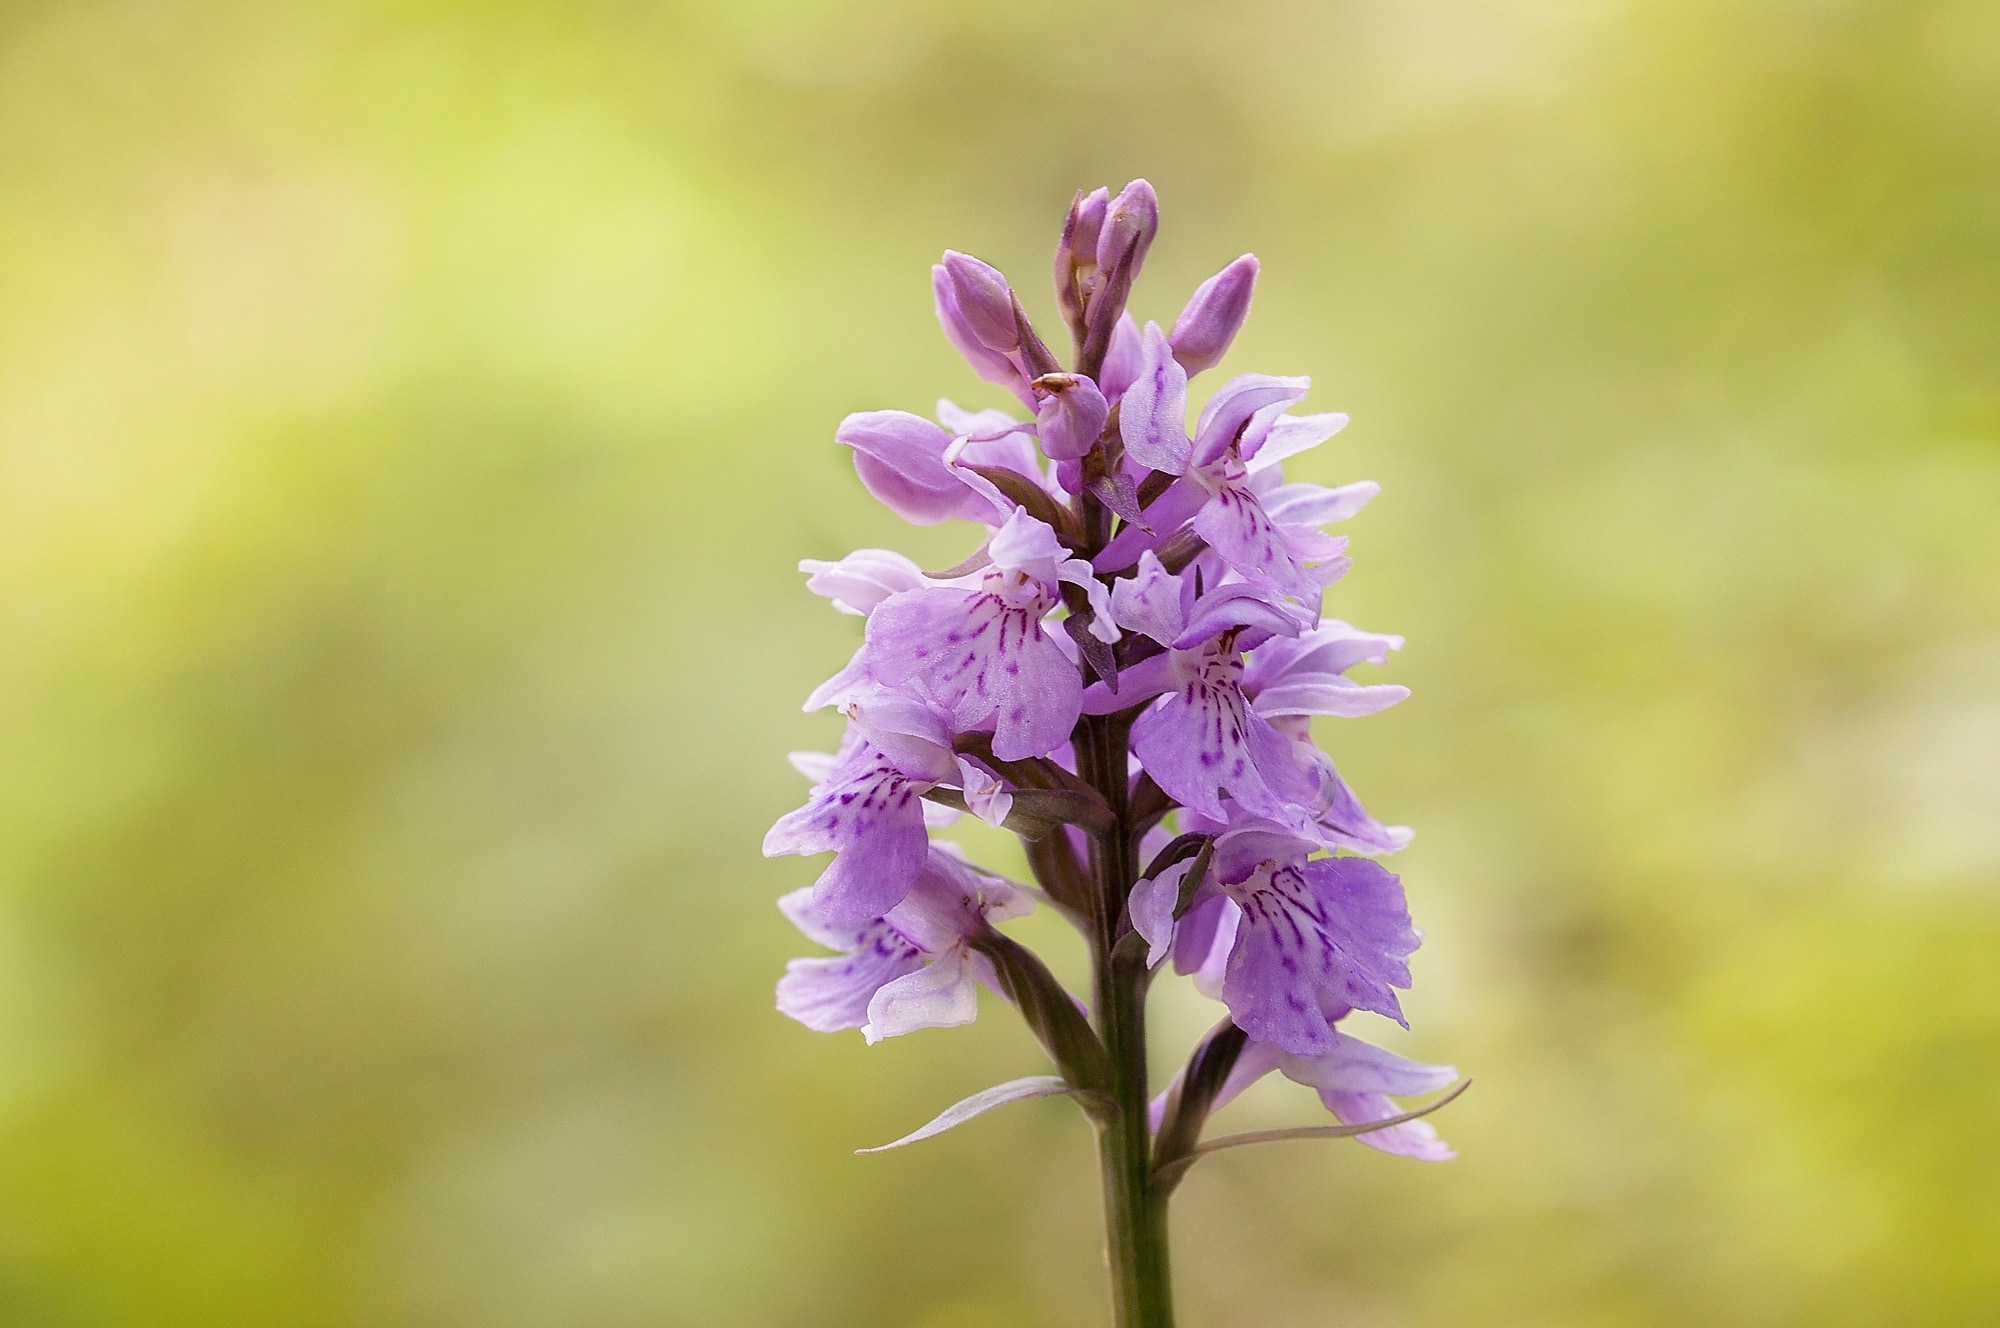 Military Orchid, Plant, Nature, Flowers, flower, purple